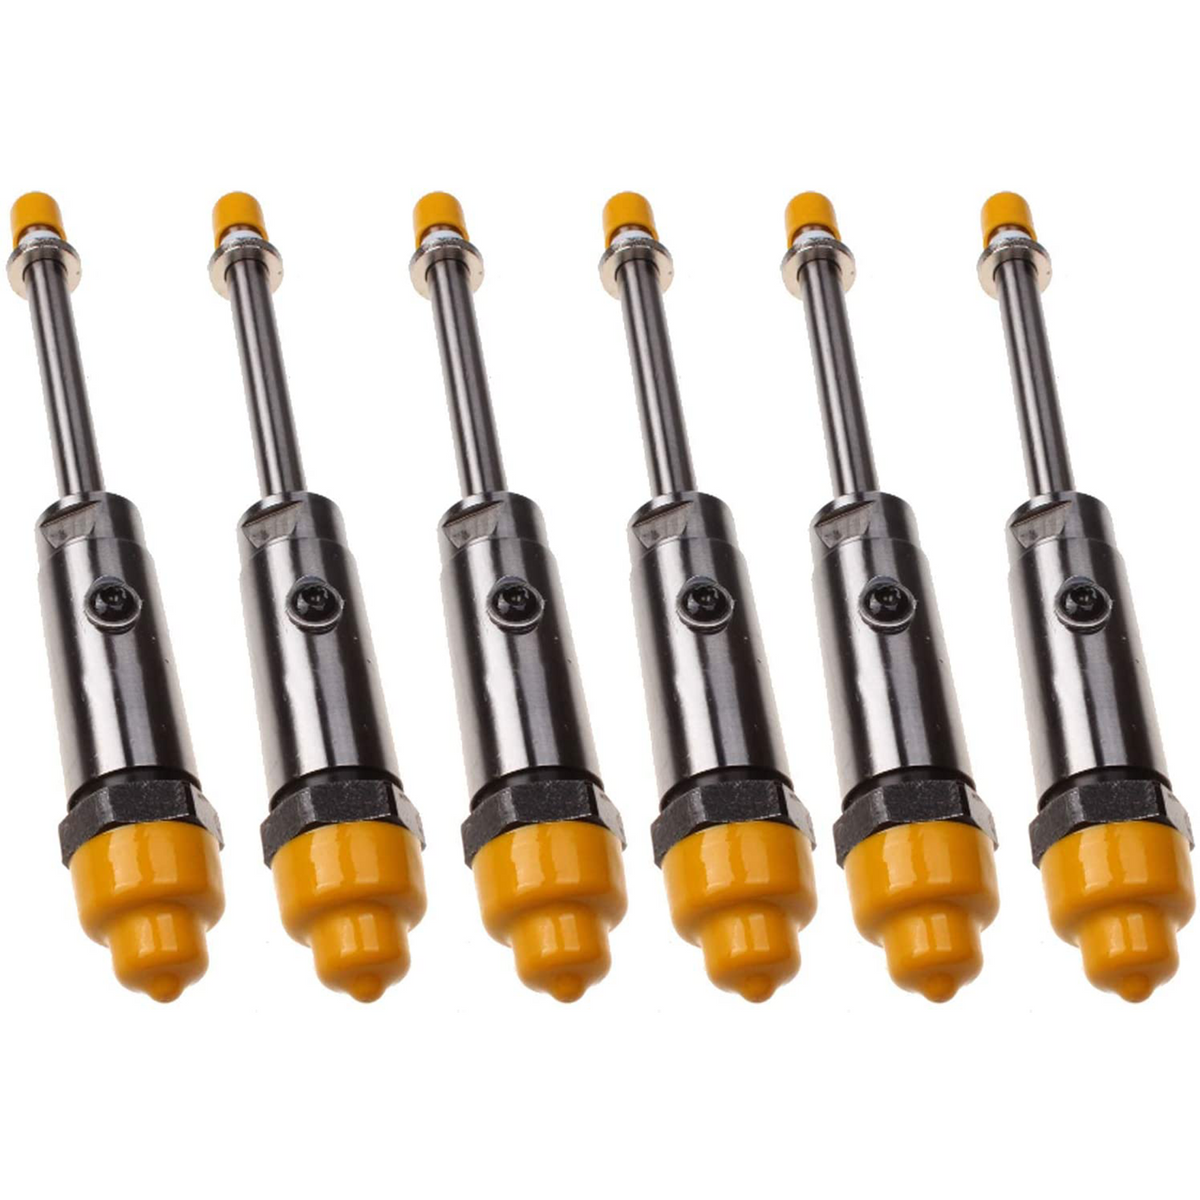 6X New Pencil Fuel Injector Nozzle 0R-3422 Fit for Caterpillar CAT 3406B 4W7018 - KUDUPARTS